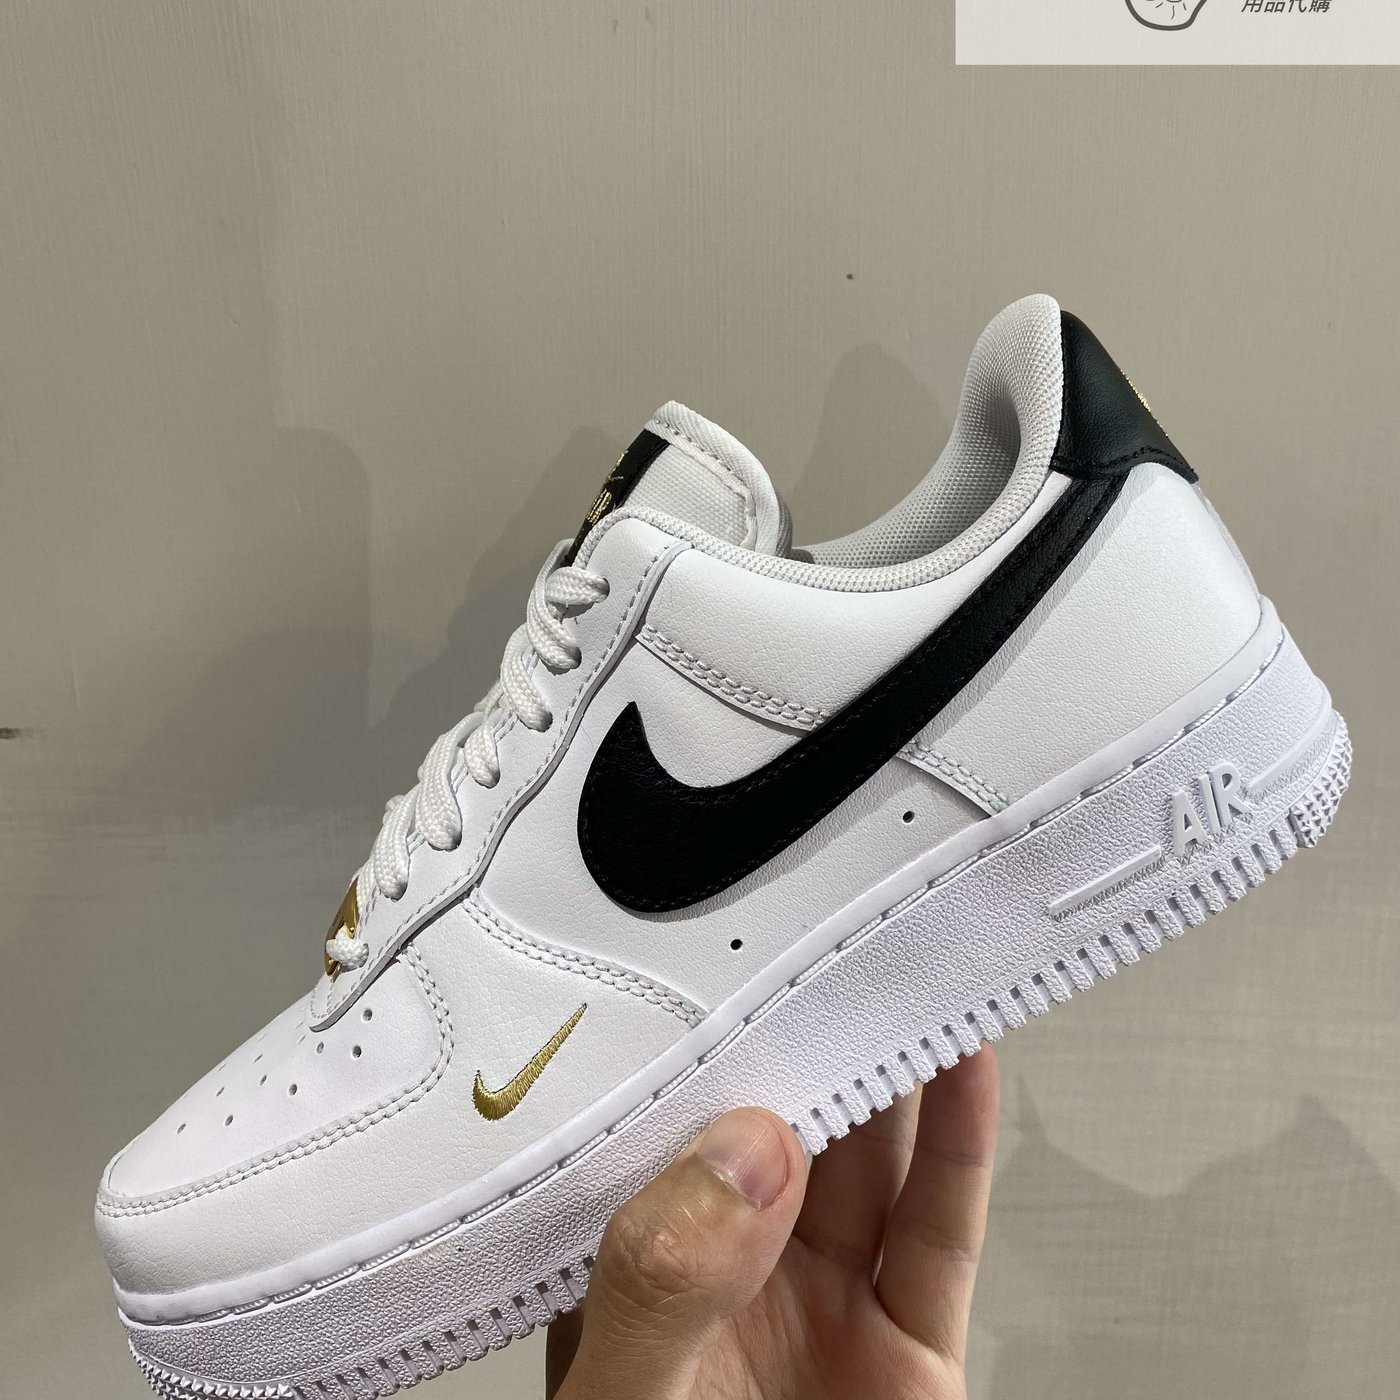 AND.】NIKE AIR FORCE 1 07 ESSENTIAL 小金勾白底黑勾女款CZ0270-102